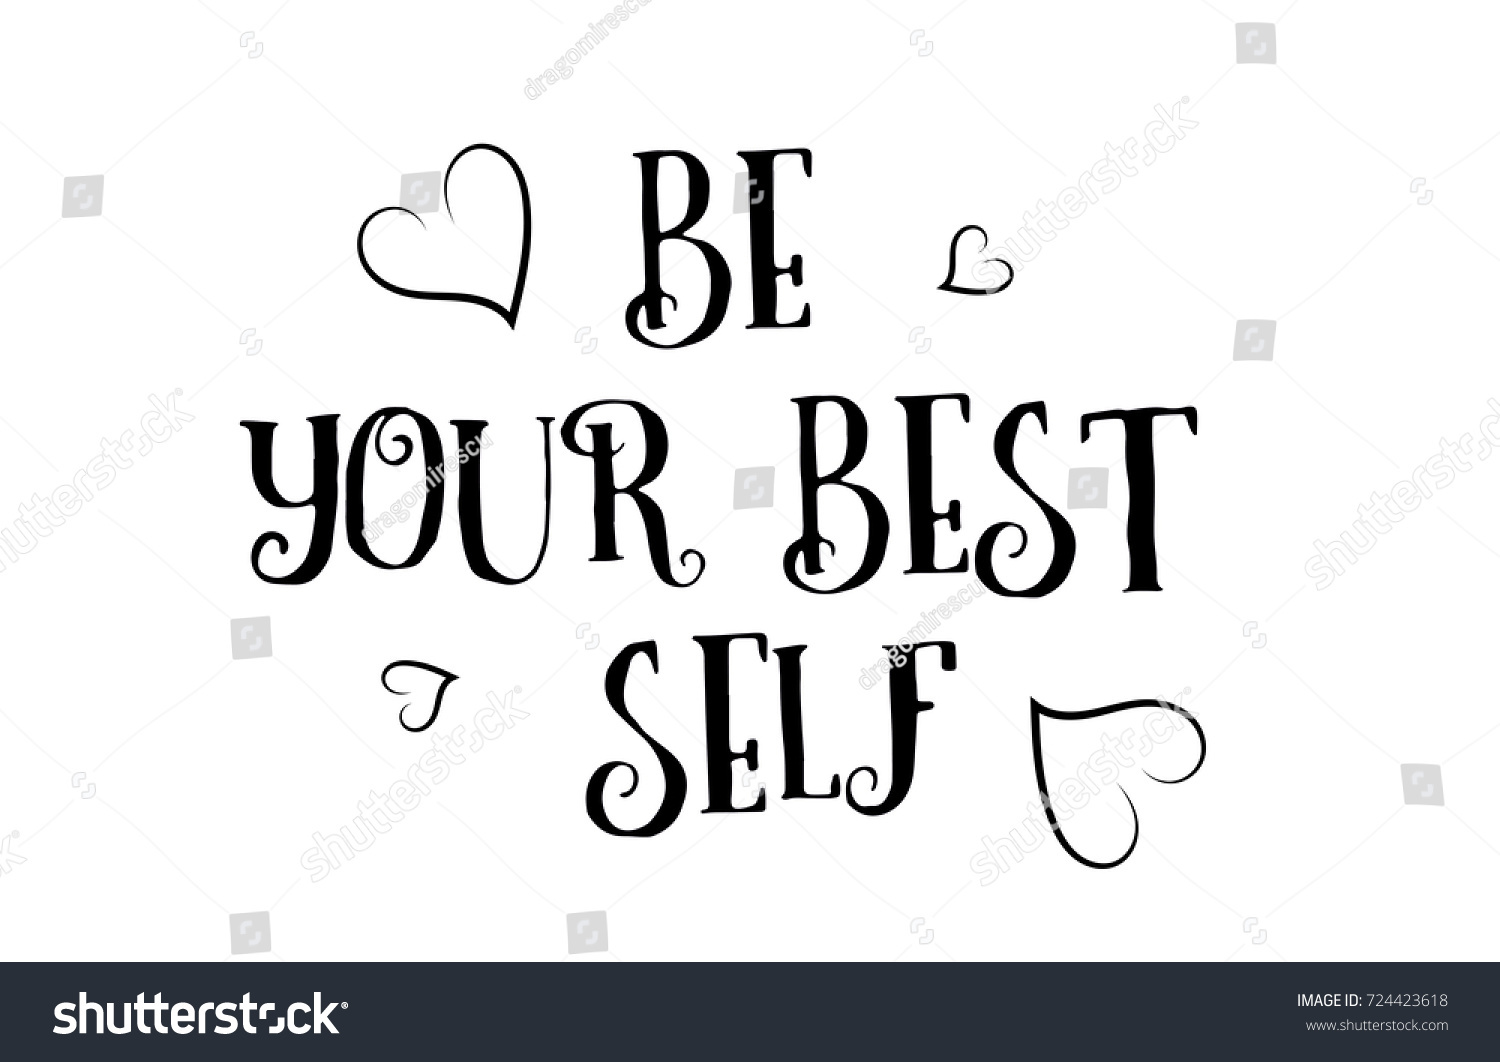 be your best self love heart quote inspiring inspirational text quote suitable for a poster greeting